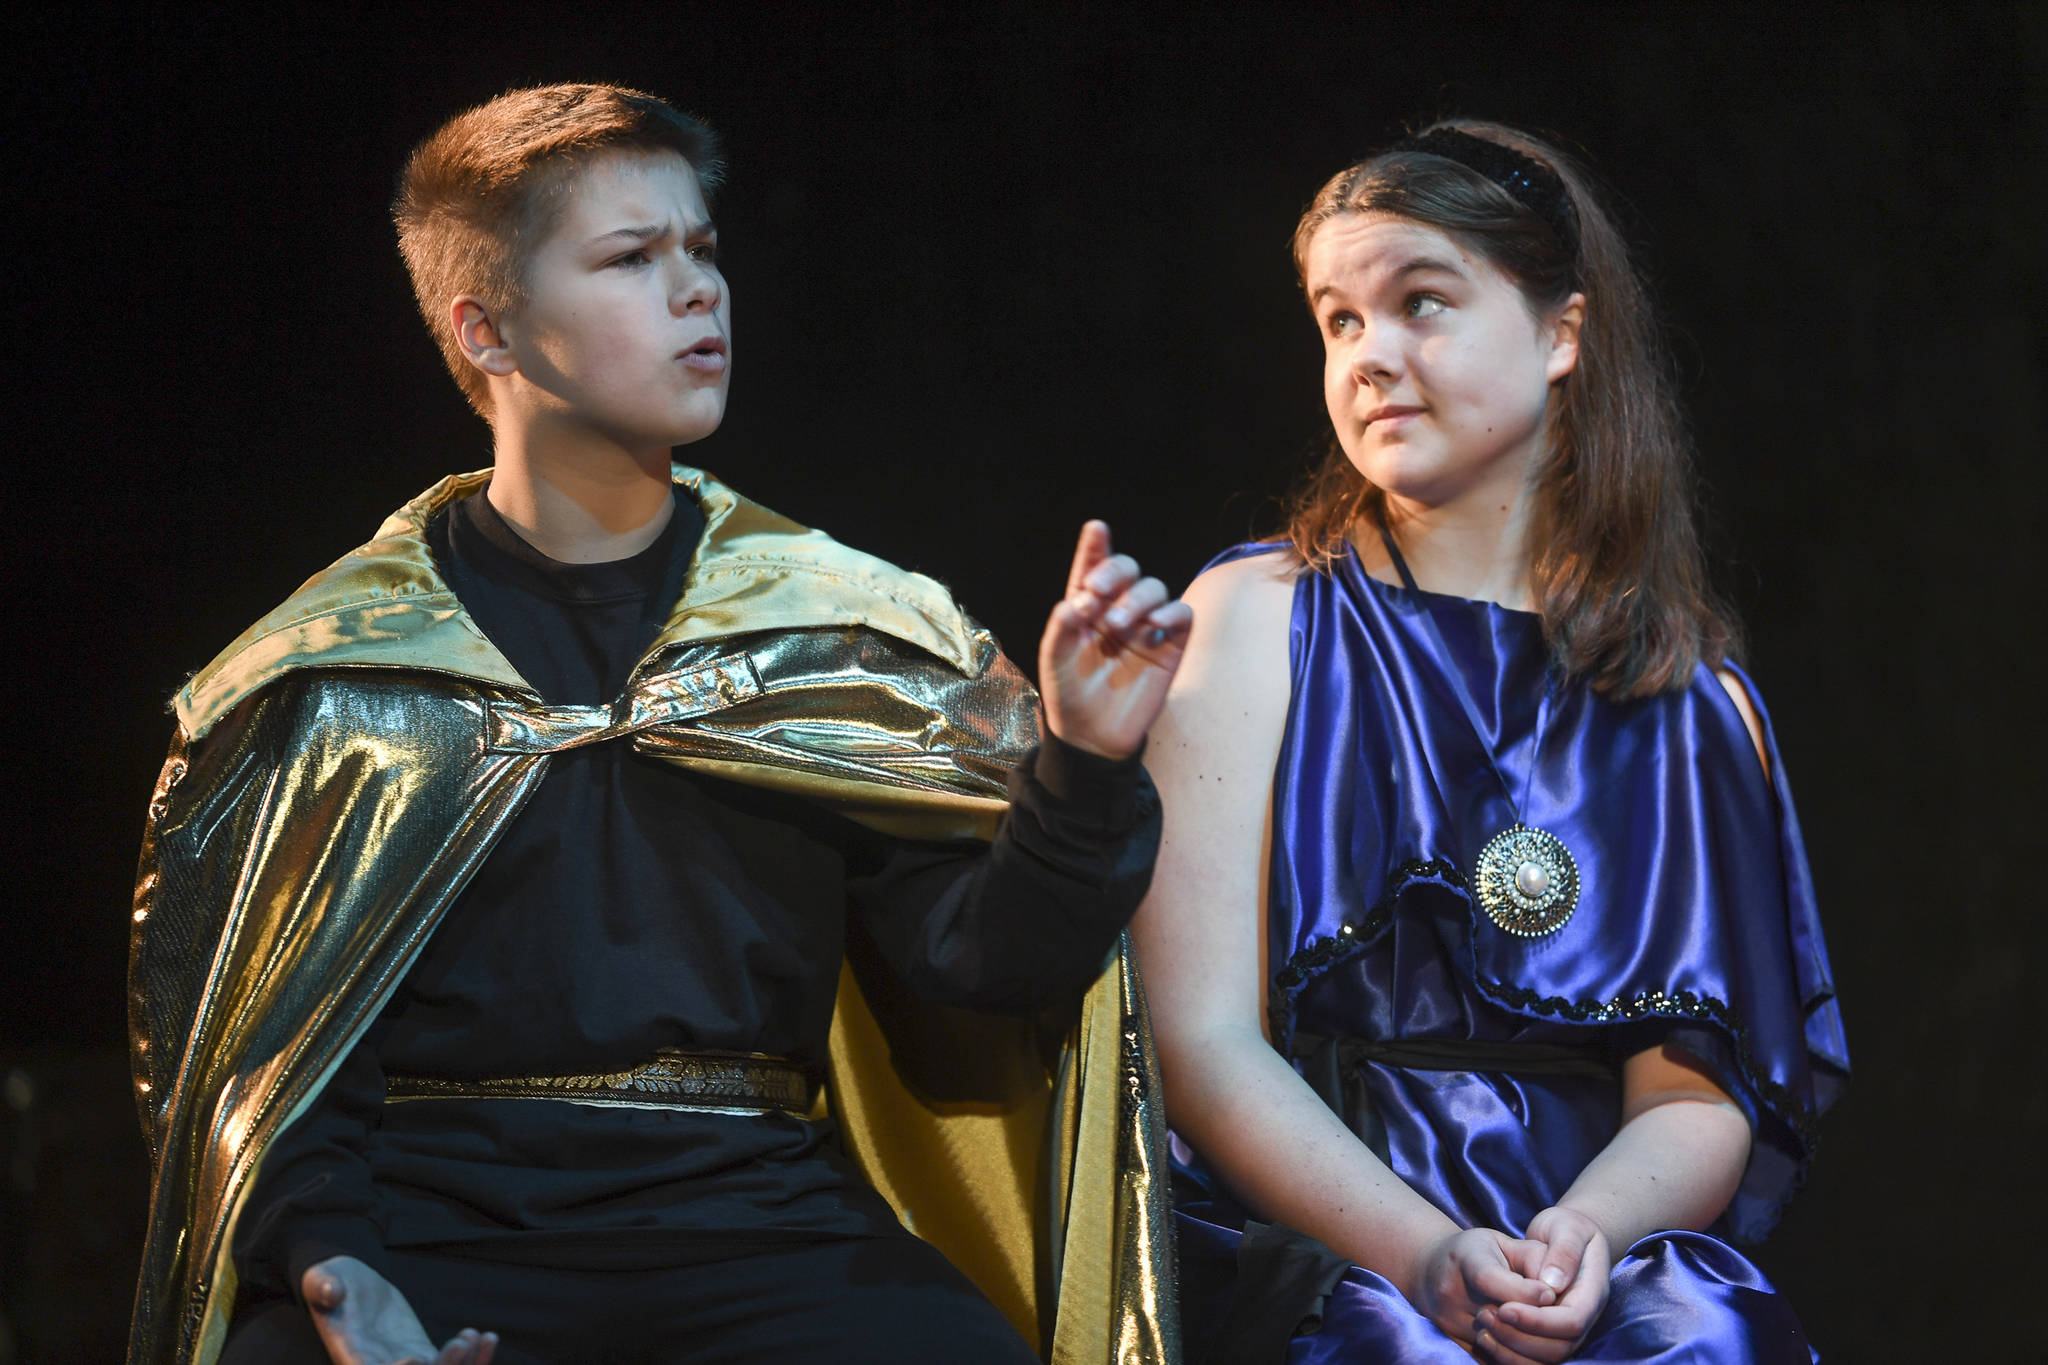 Kyra Wood, left, as King Simonides, and Kat Shelton, as Princess Thaisa, rehearse in Perseverance Theatre’s STAR production of “Pericles 2216: The Intergalactic Adventures of the Prince of Tyre” on Tuesday, July 16, 2019. (Michael Penn | Juneau Empire)